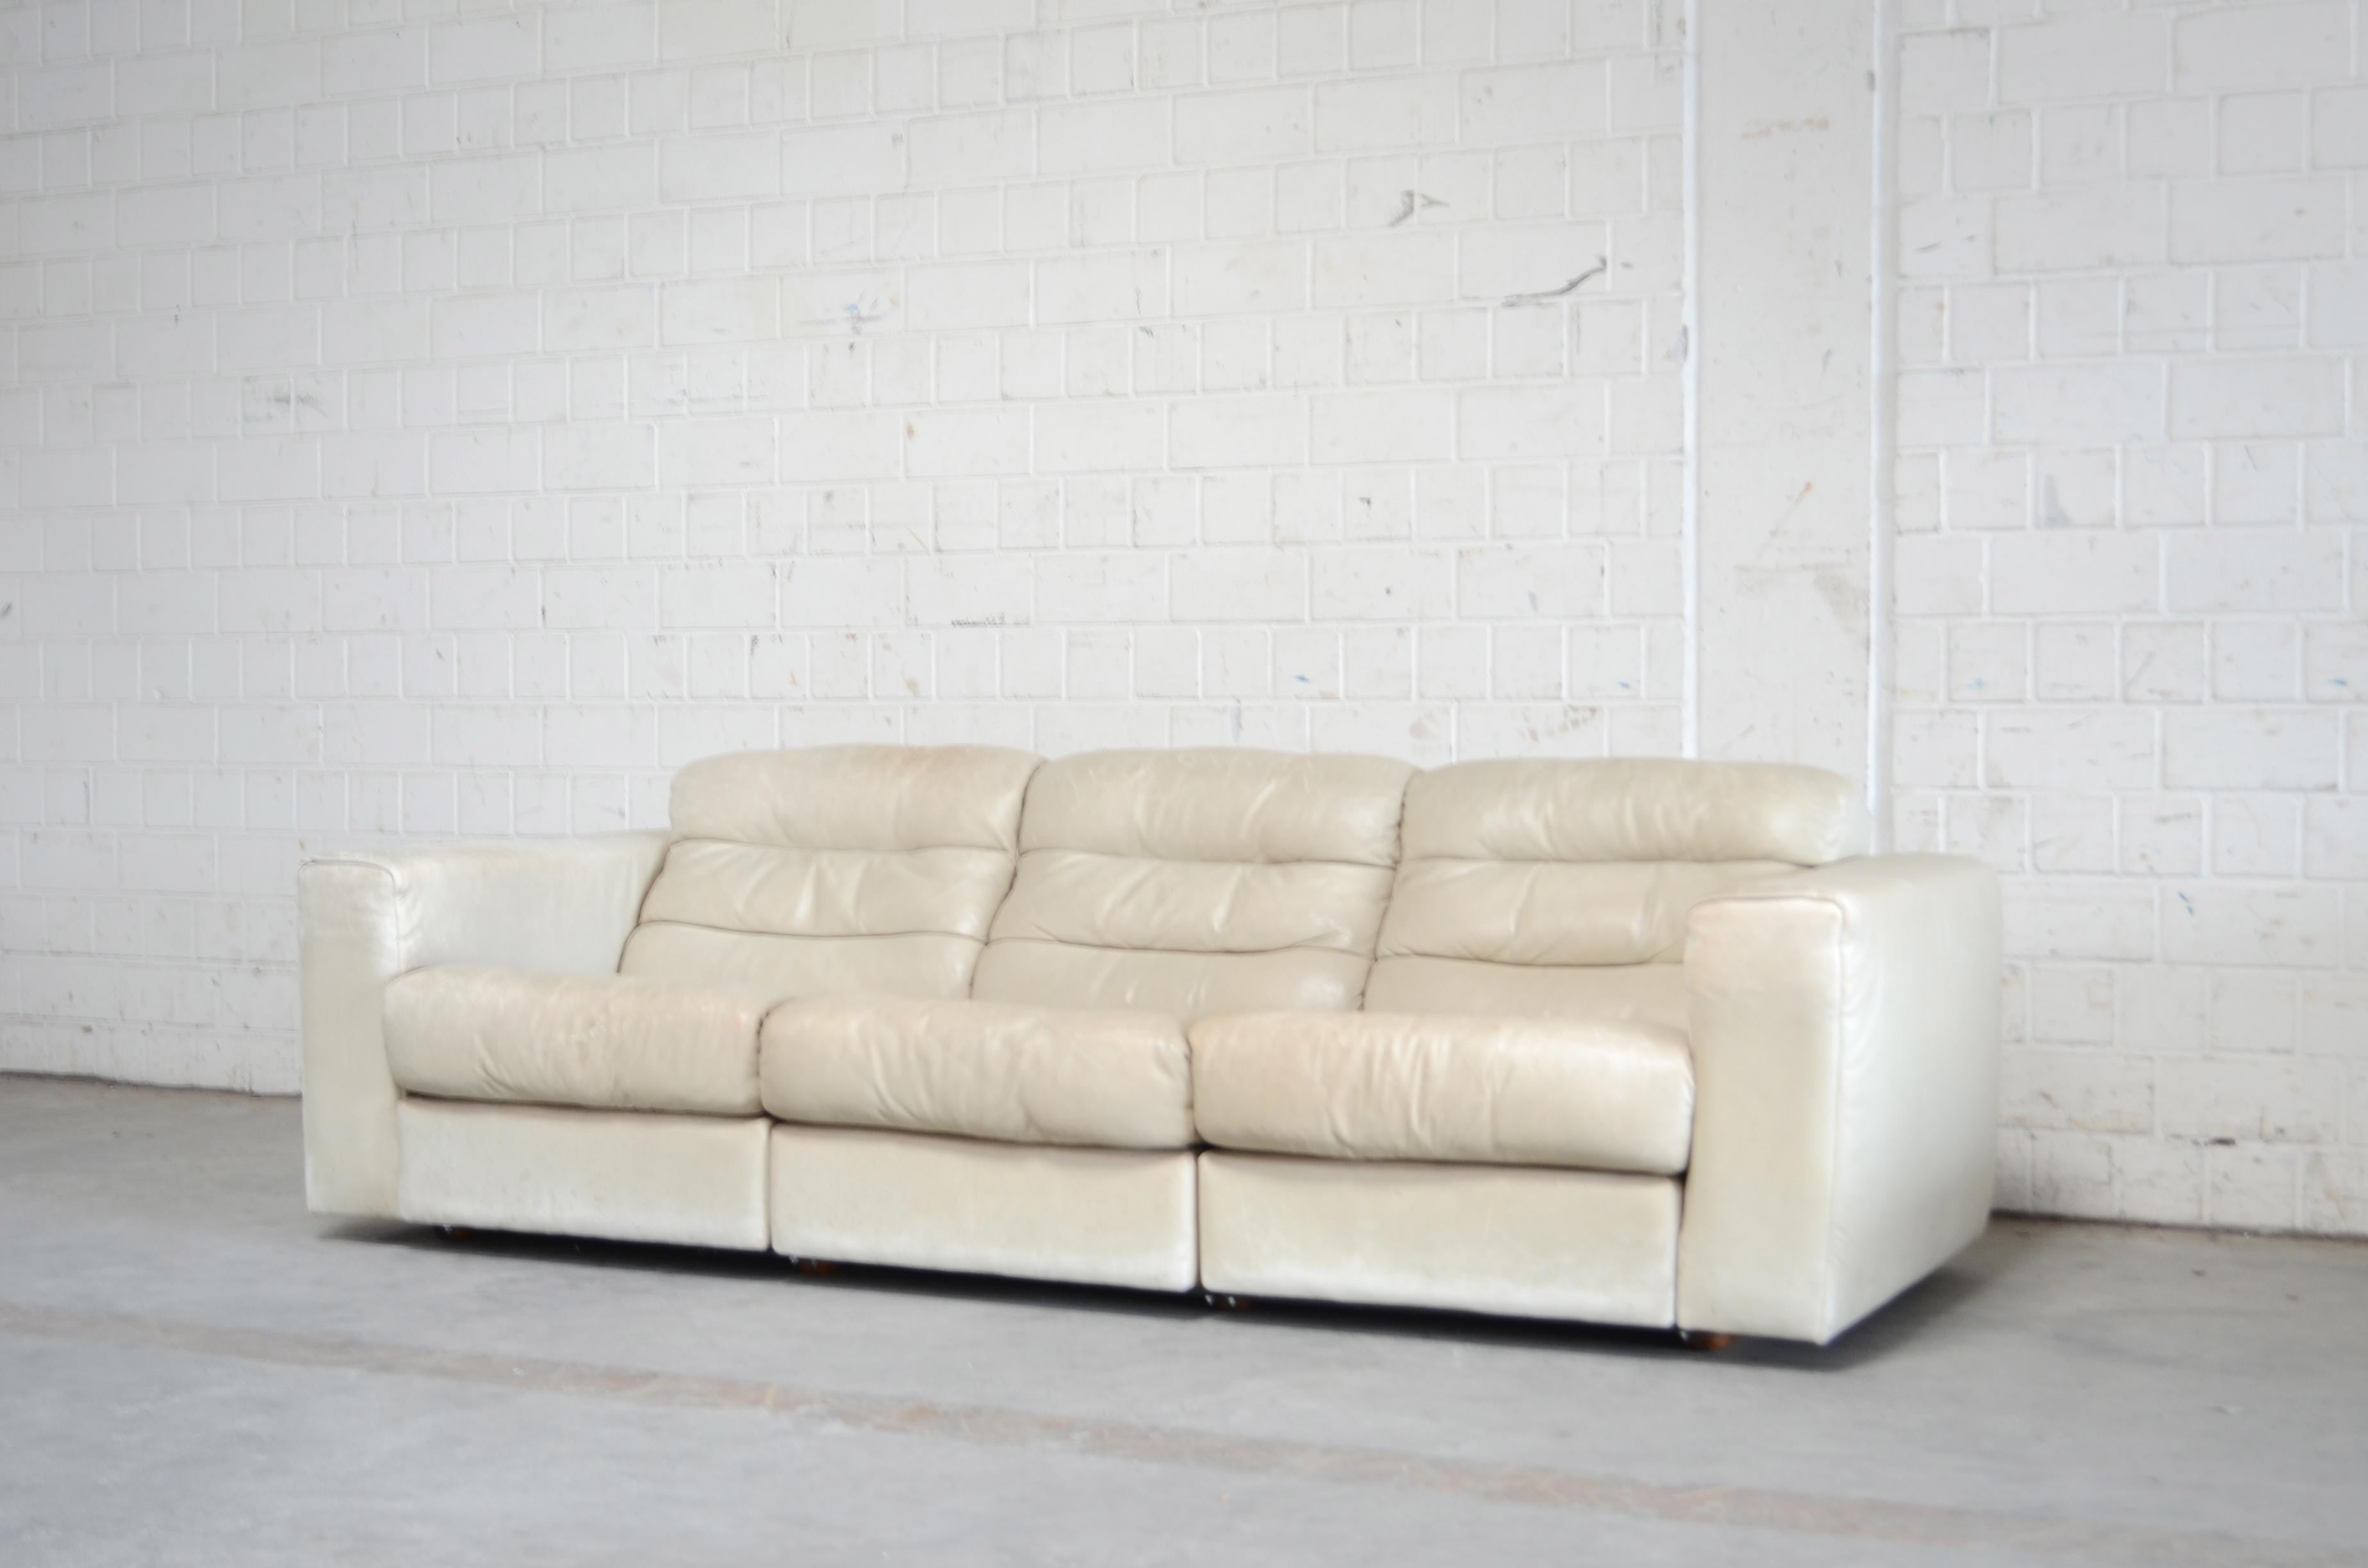 De Sede leather sofa DS 105.
Aniline leather in ecru white
Great comfort with an extendable seat for much more lounge comfort.
I´ts a rare De sede model.
Hard to find.



  